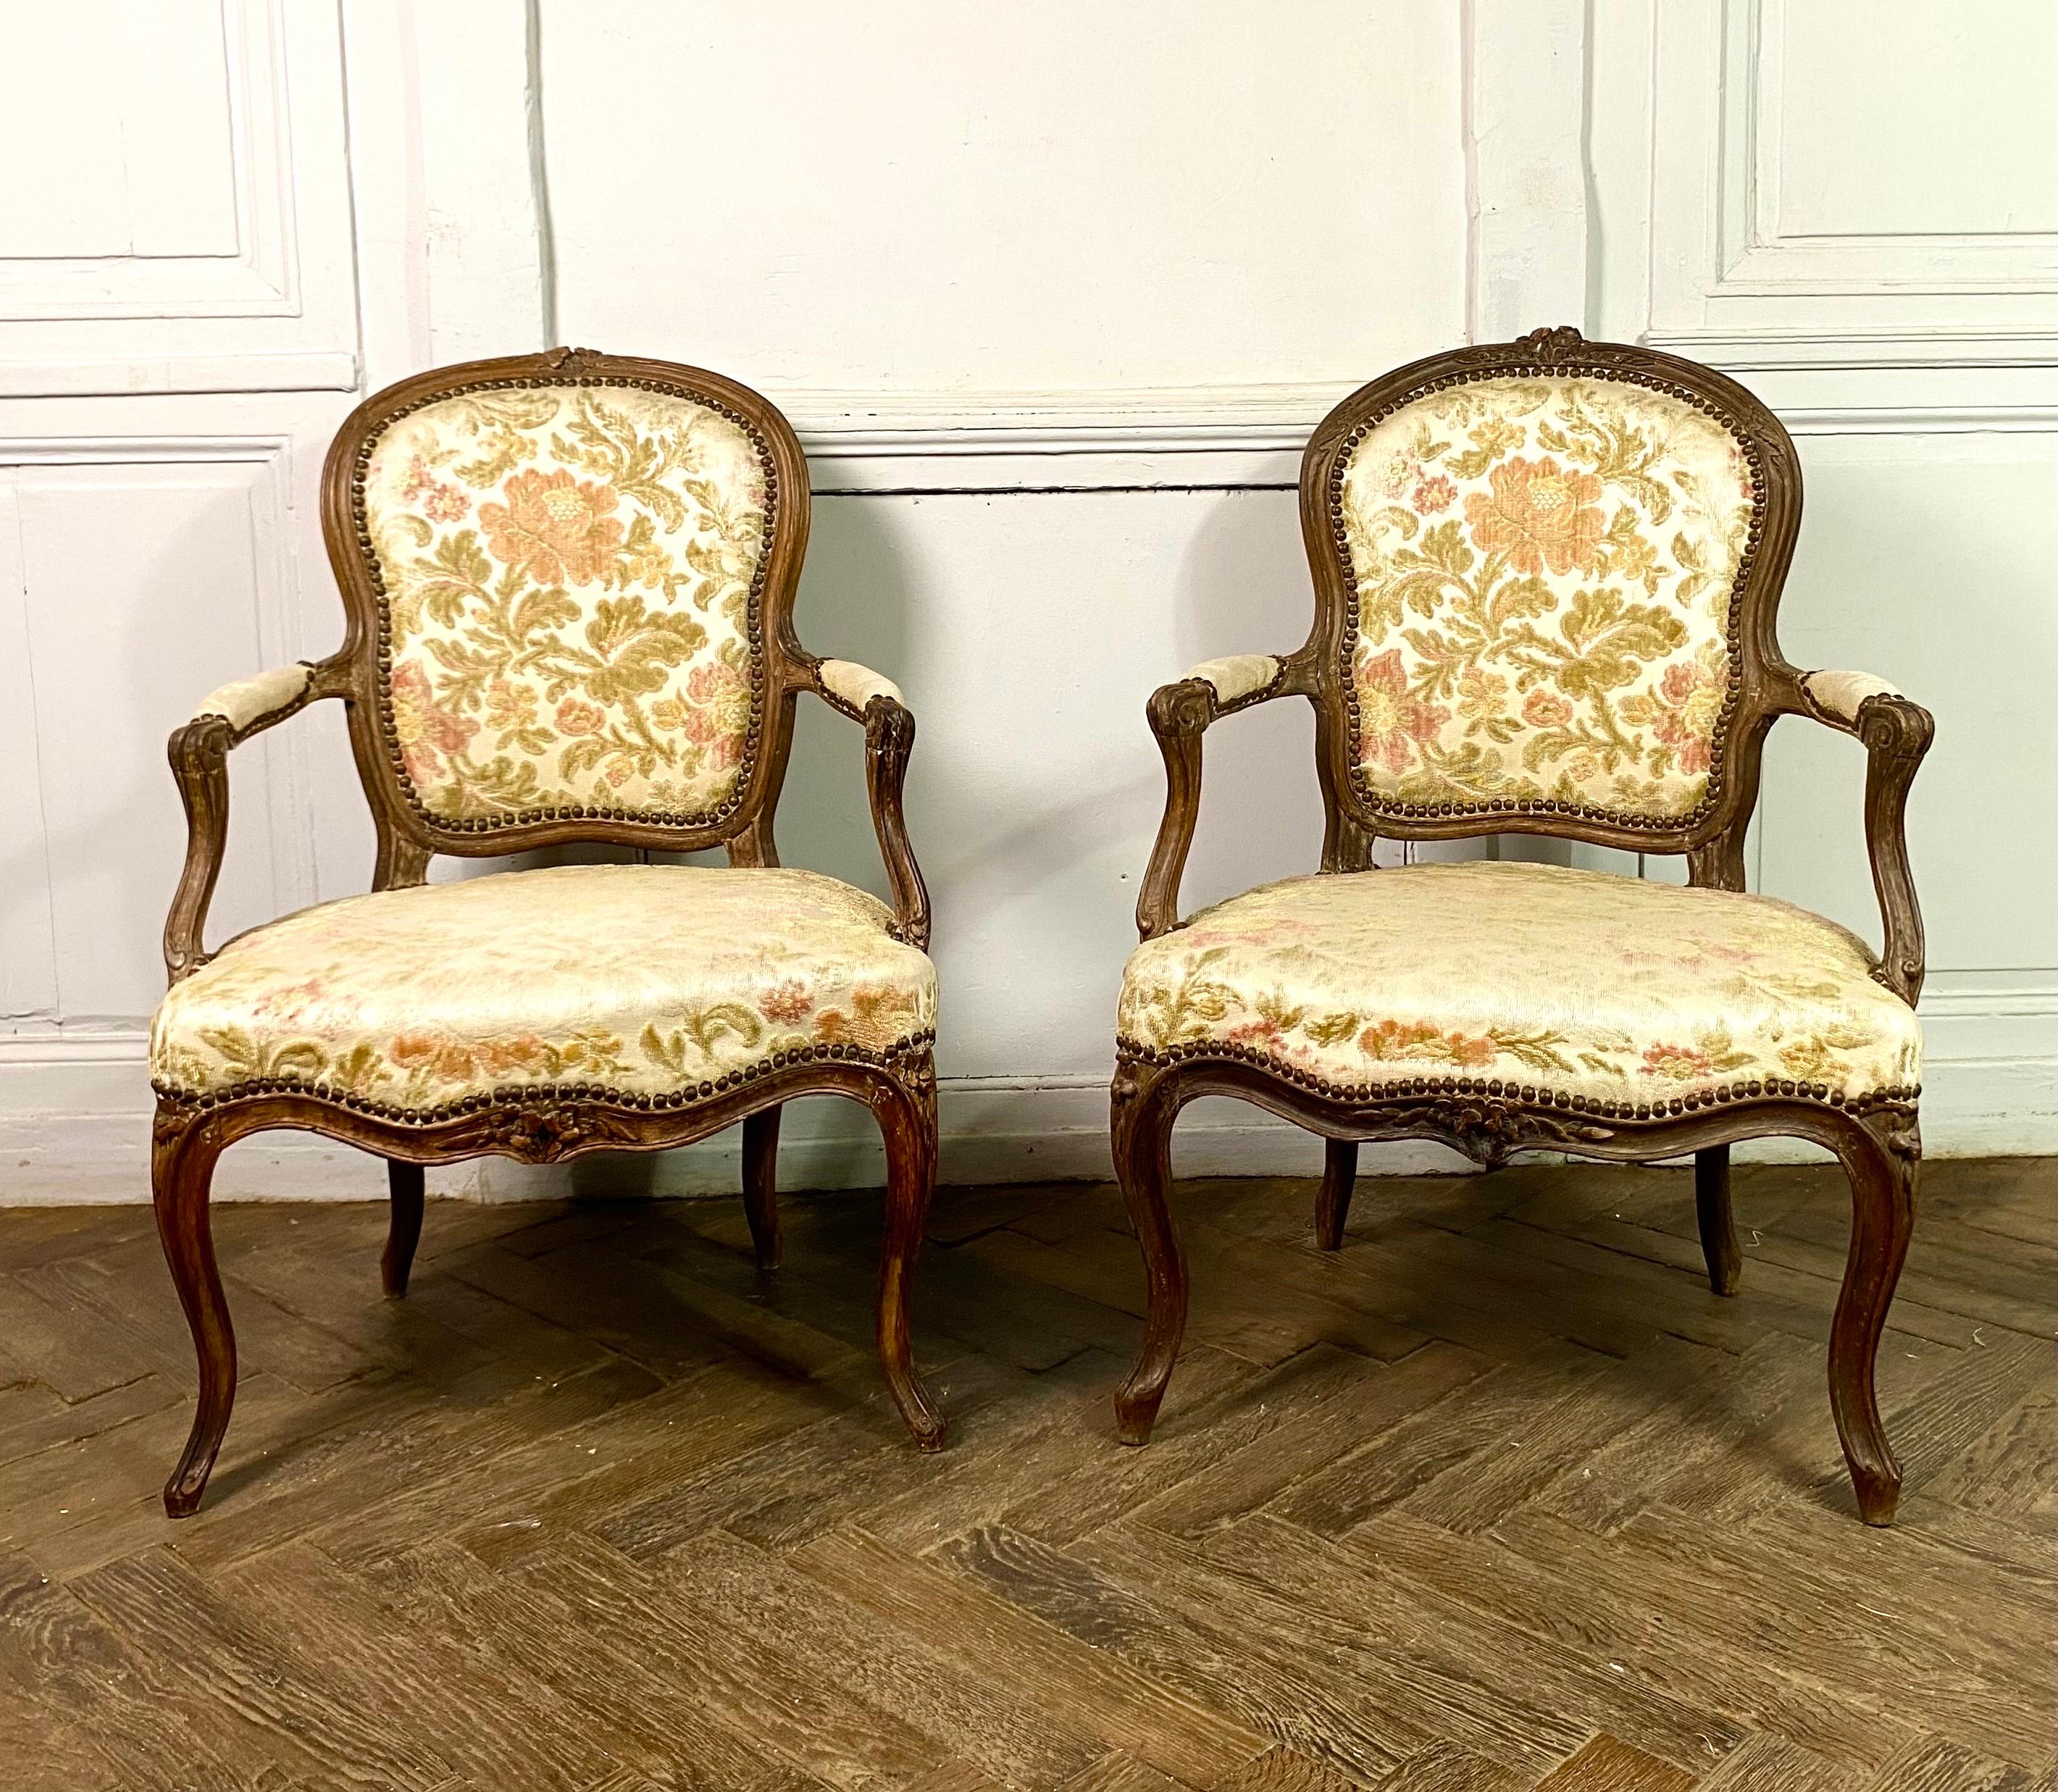 Magnificent pair of convertible armchairs with violin backs in molded and carved walnut from the Louis XV period. one of which is signed Blanchard. The armchairs have an elegant decoration of flowers and foliage.
One of the two armchairs is stamped